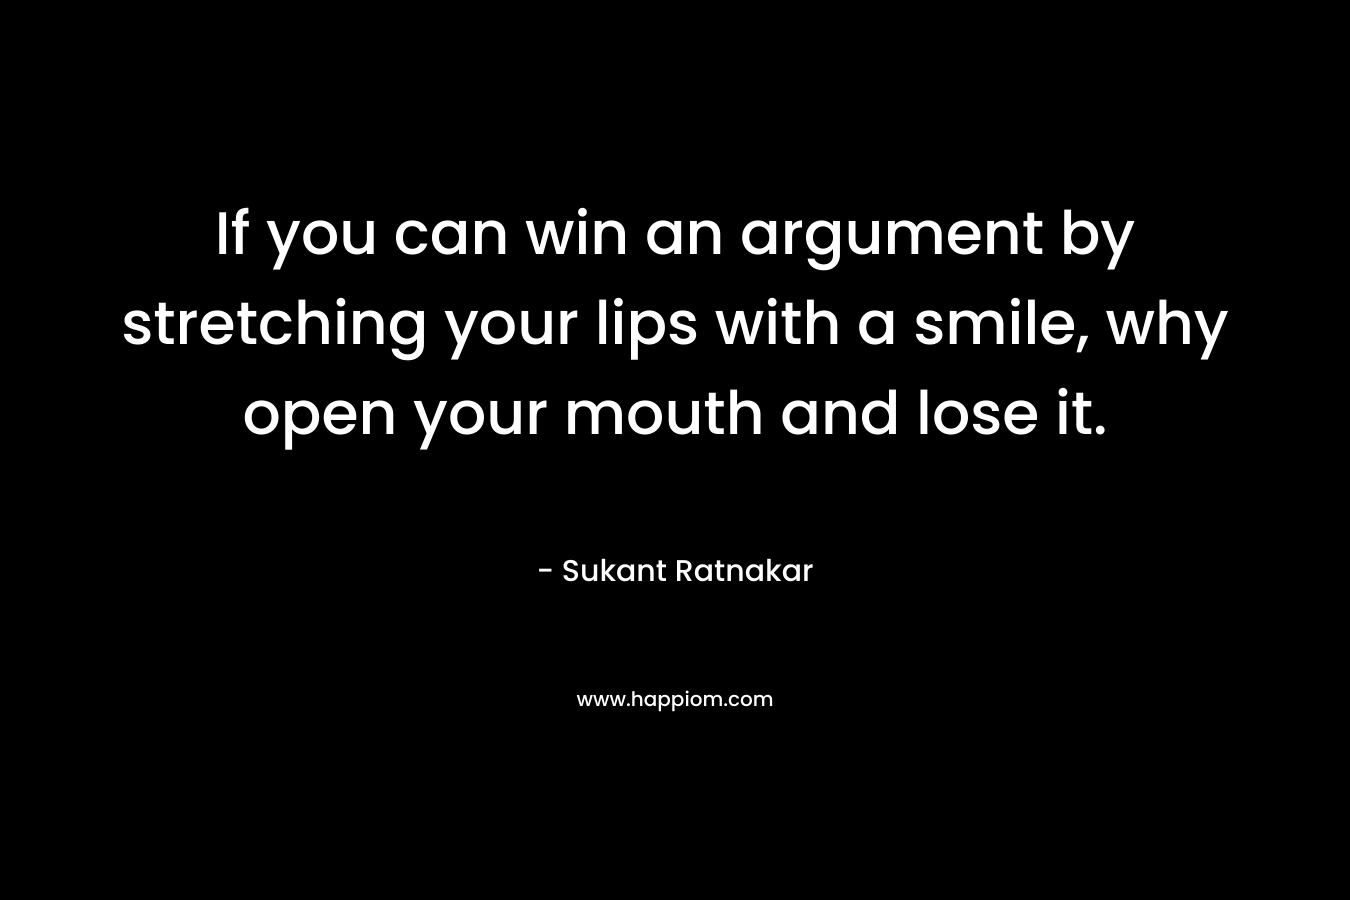 If you can win an argument by stretching your lips with a smile, why open your mouth and lose it.